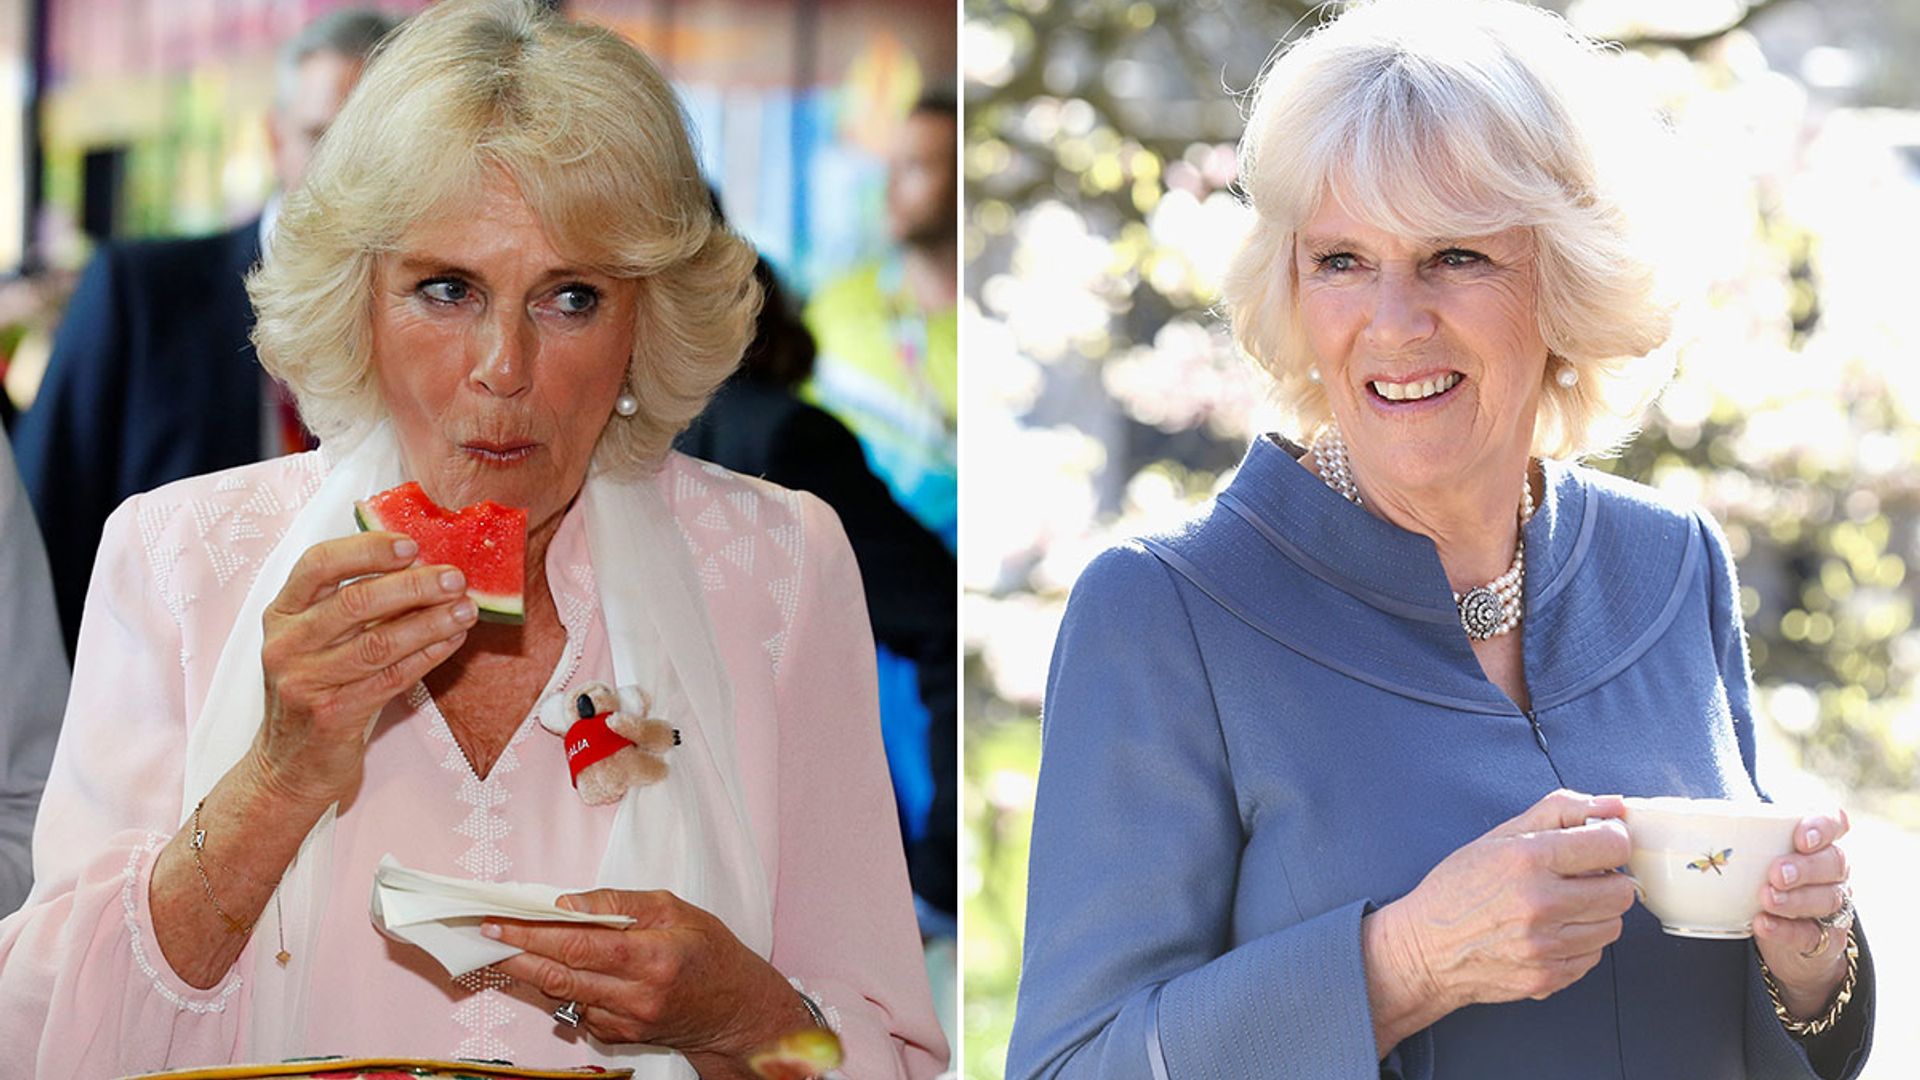 Find out what the Duchess of Cornwall and husband Prince Charles eat in a d...